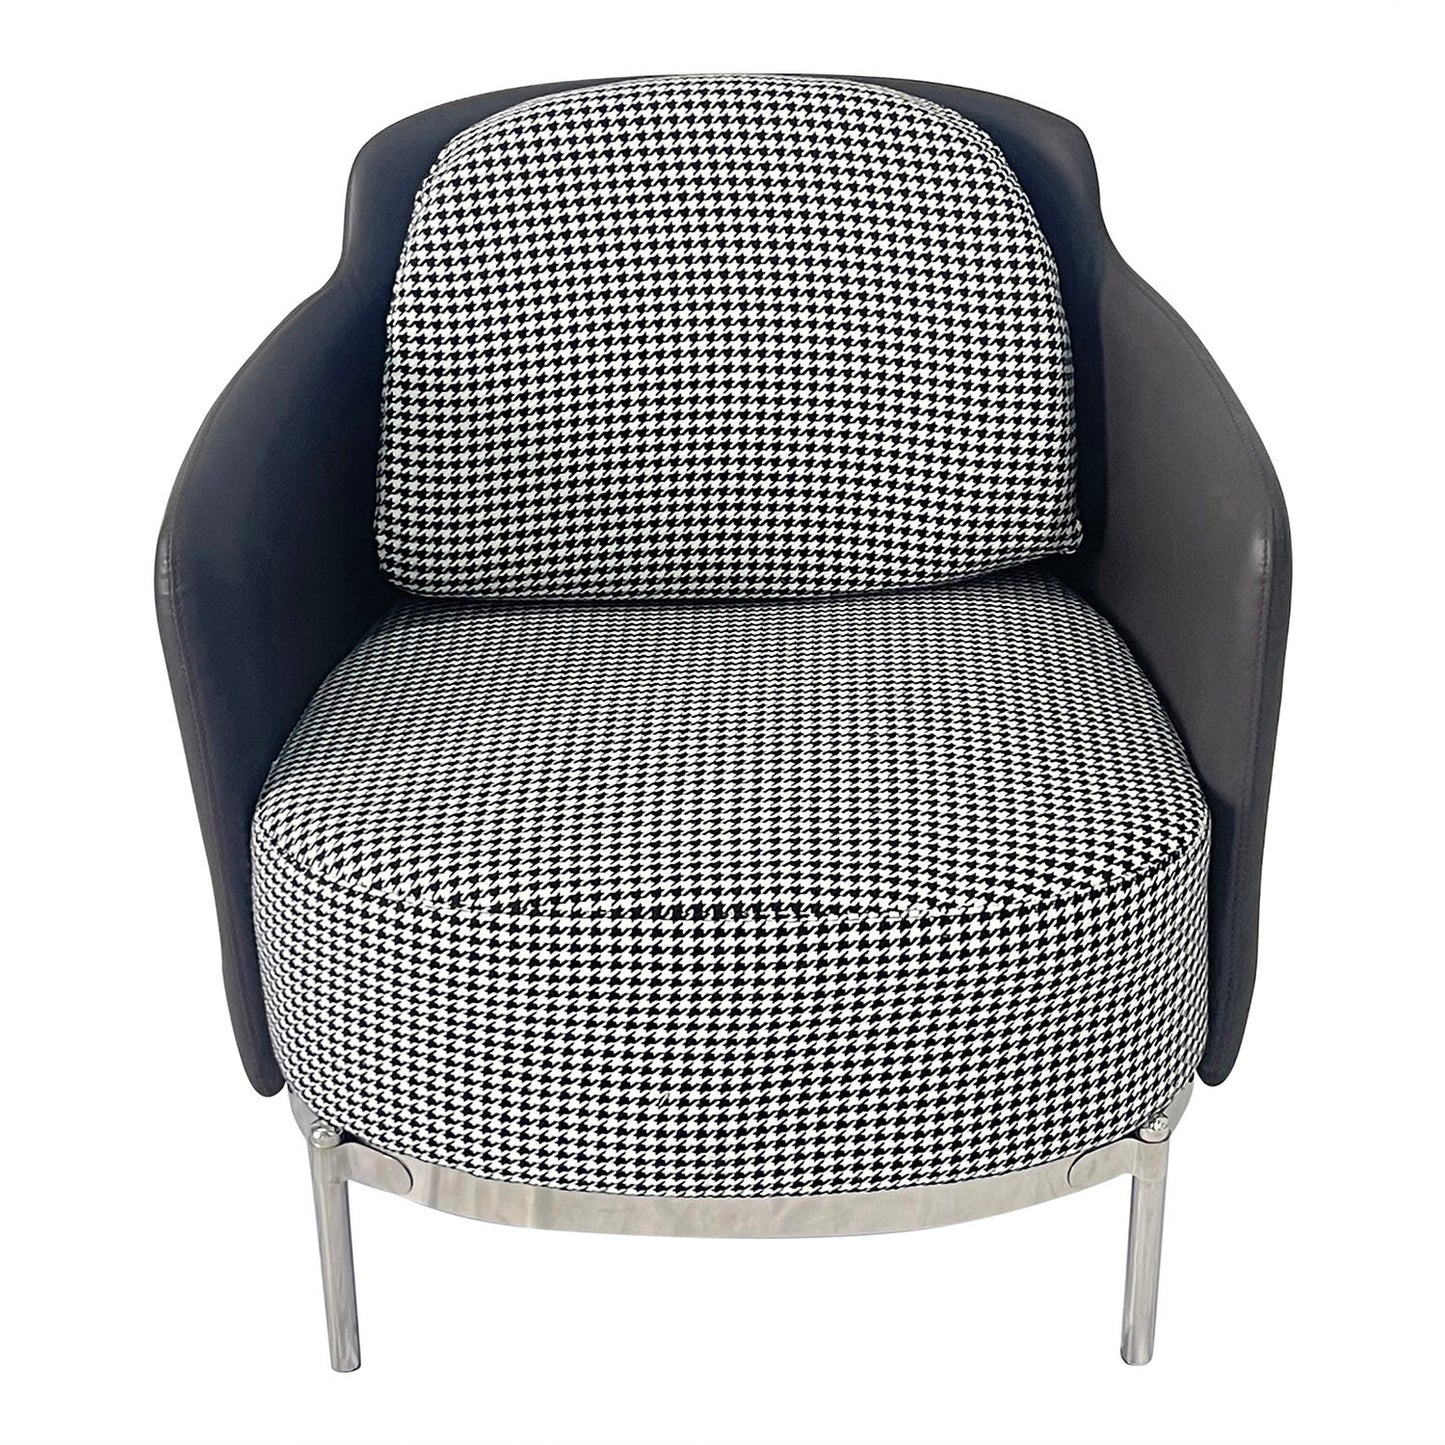 Gray and Silver Sofa Chair - Enova Luxe Home Store